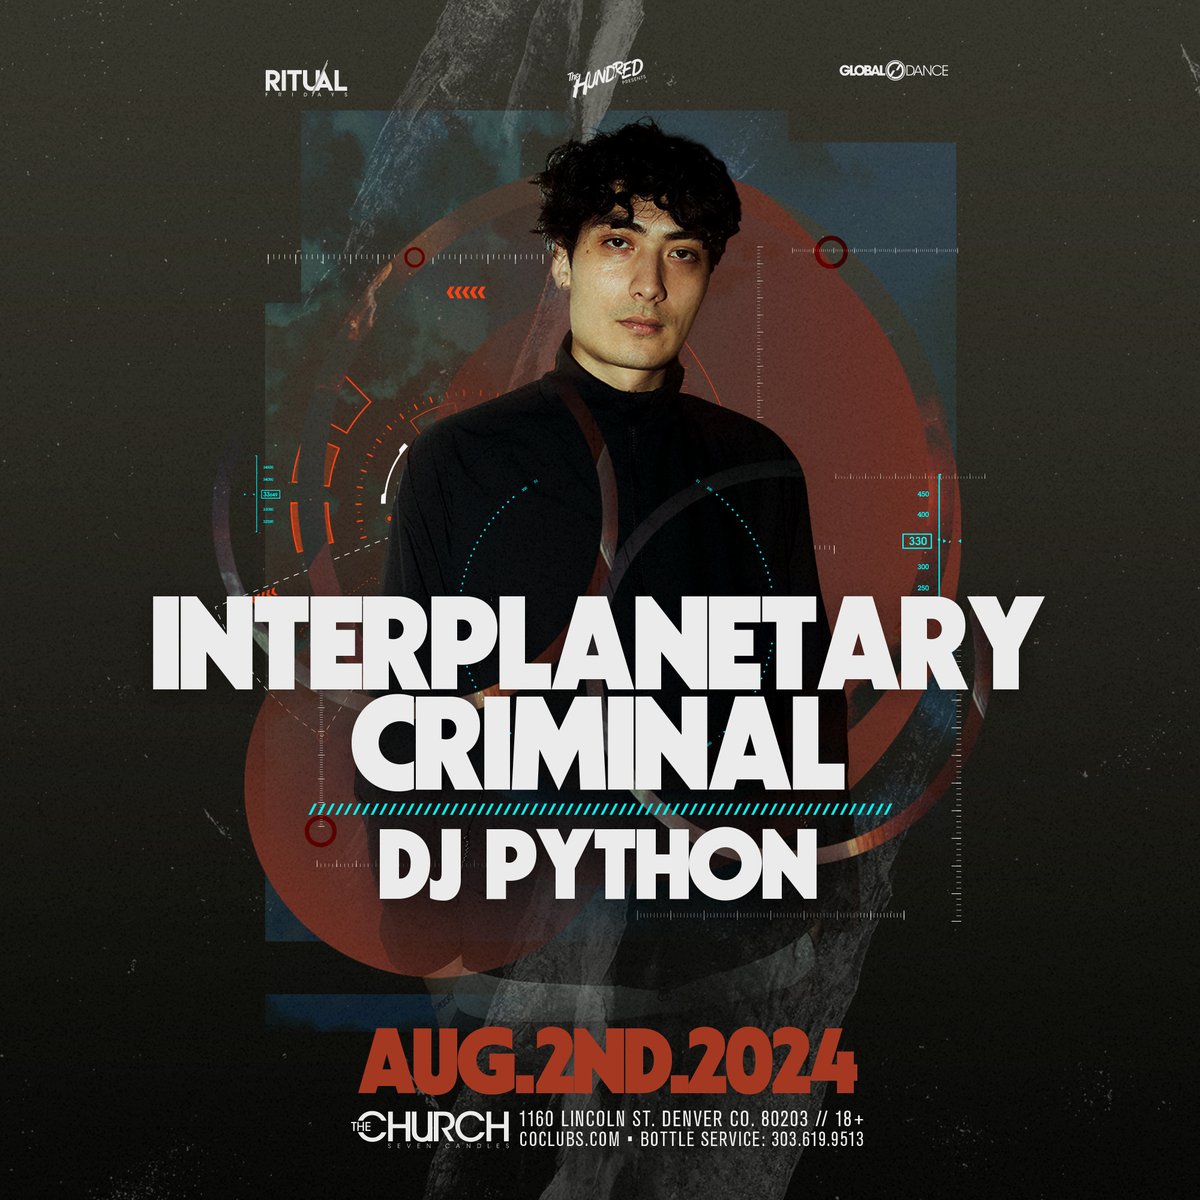 Mirror Mirror on the wall...who's the baddest of them all.... Dance music's hottest new player @intergalacticz is making his Denver club debut with DJ Python at #RITUALFRIDAYS 8.2 🤩💫🔥 Don't sleep on tickets, grab yours now to secure your spot > bit.ly/ritualxipc